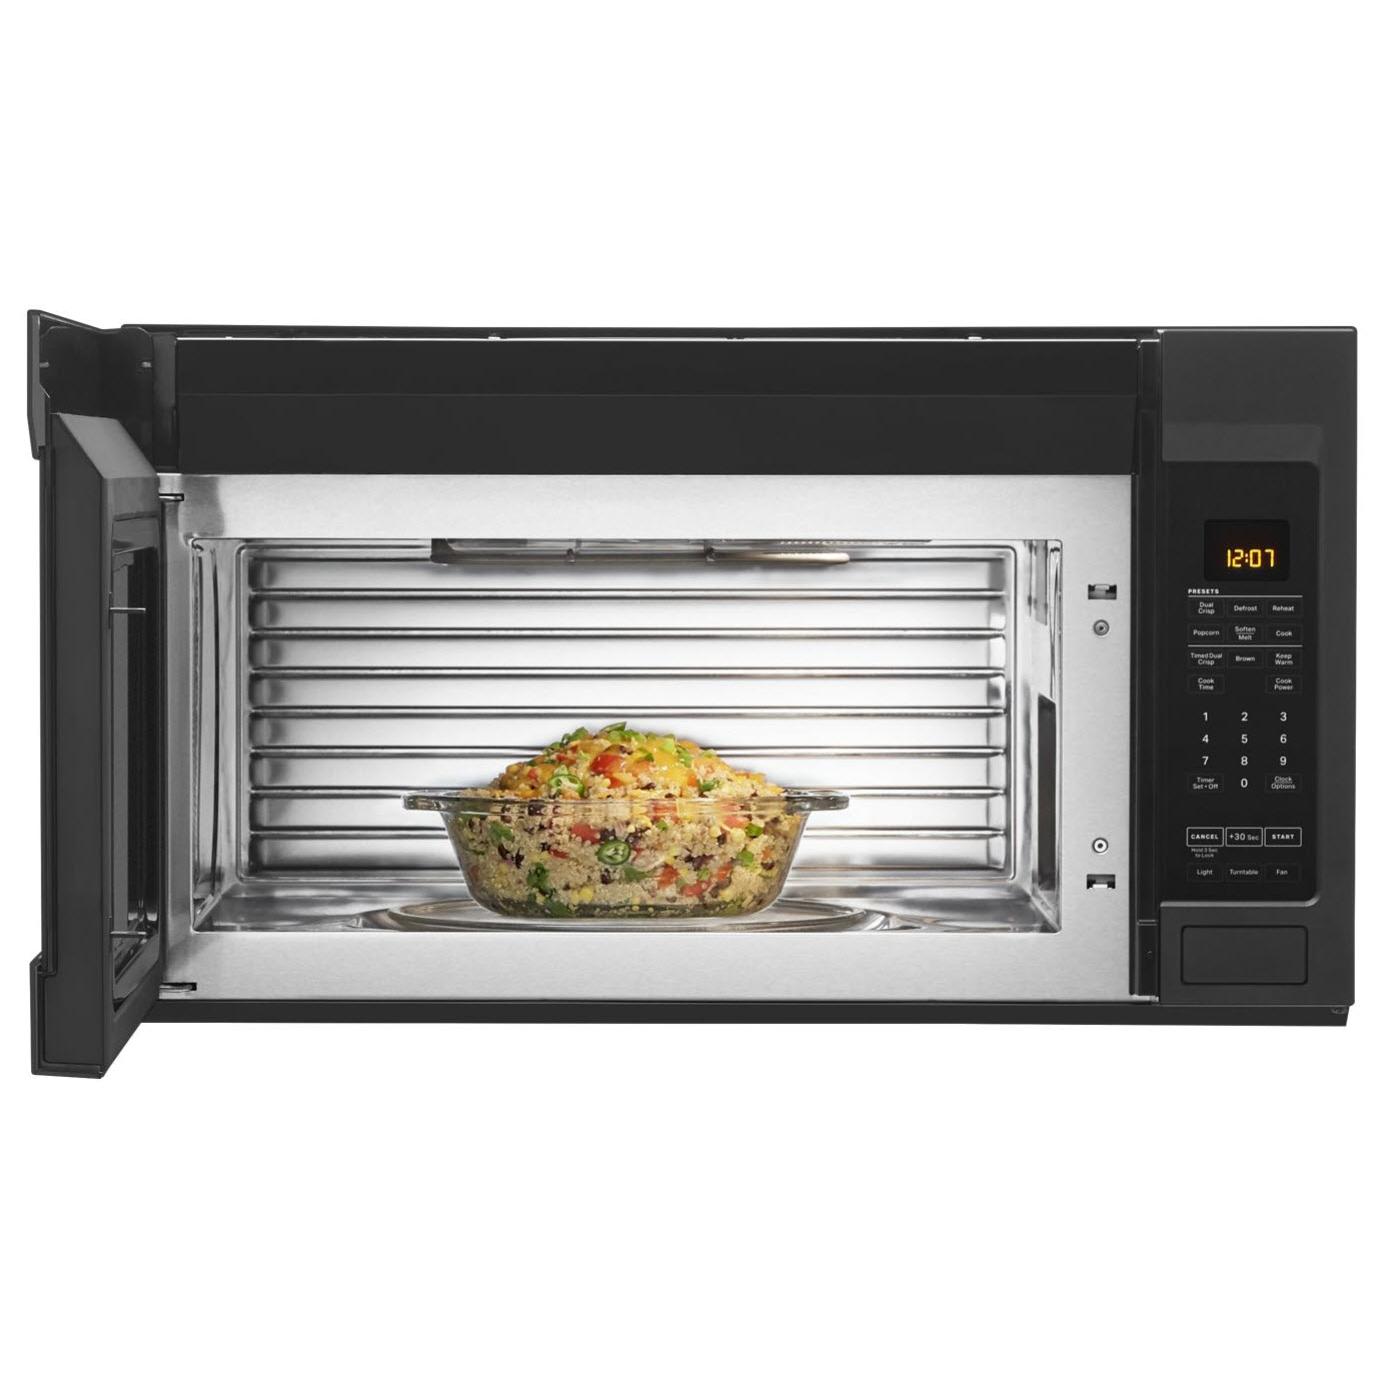 Maytag 30-inch, 1.9 cu.ft. Over-the-Range Microwave Oven with Stainless Steel Interior MMV4207JK